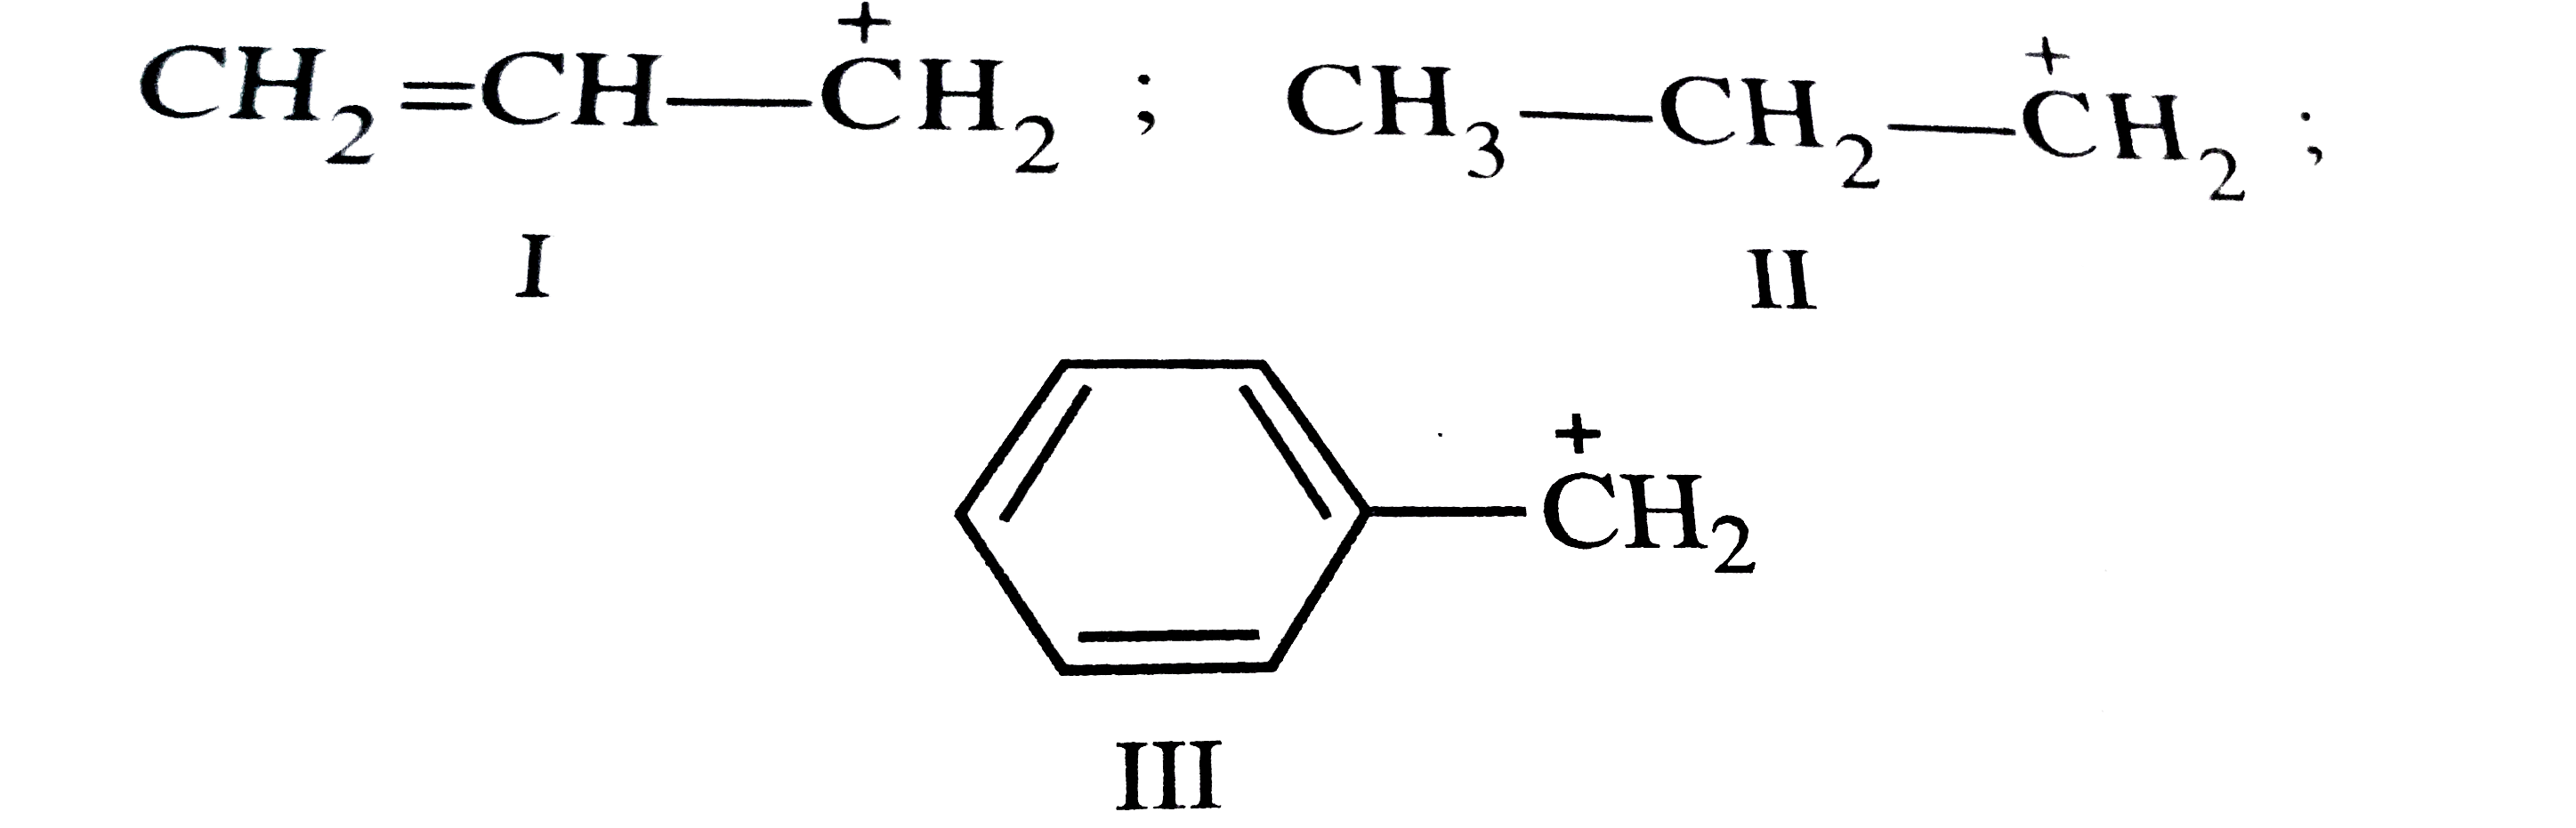 The order of stability of the following carbocations is   underset(I)(CH(2)=CH-overset(+)(C)H(2))  ,  underset(II)(CH(3)-CH(2)-overset(+)(C)H(2)),